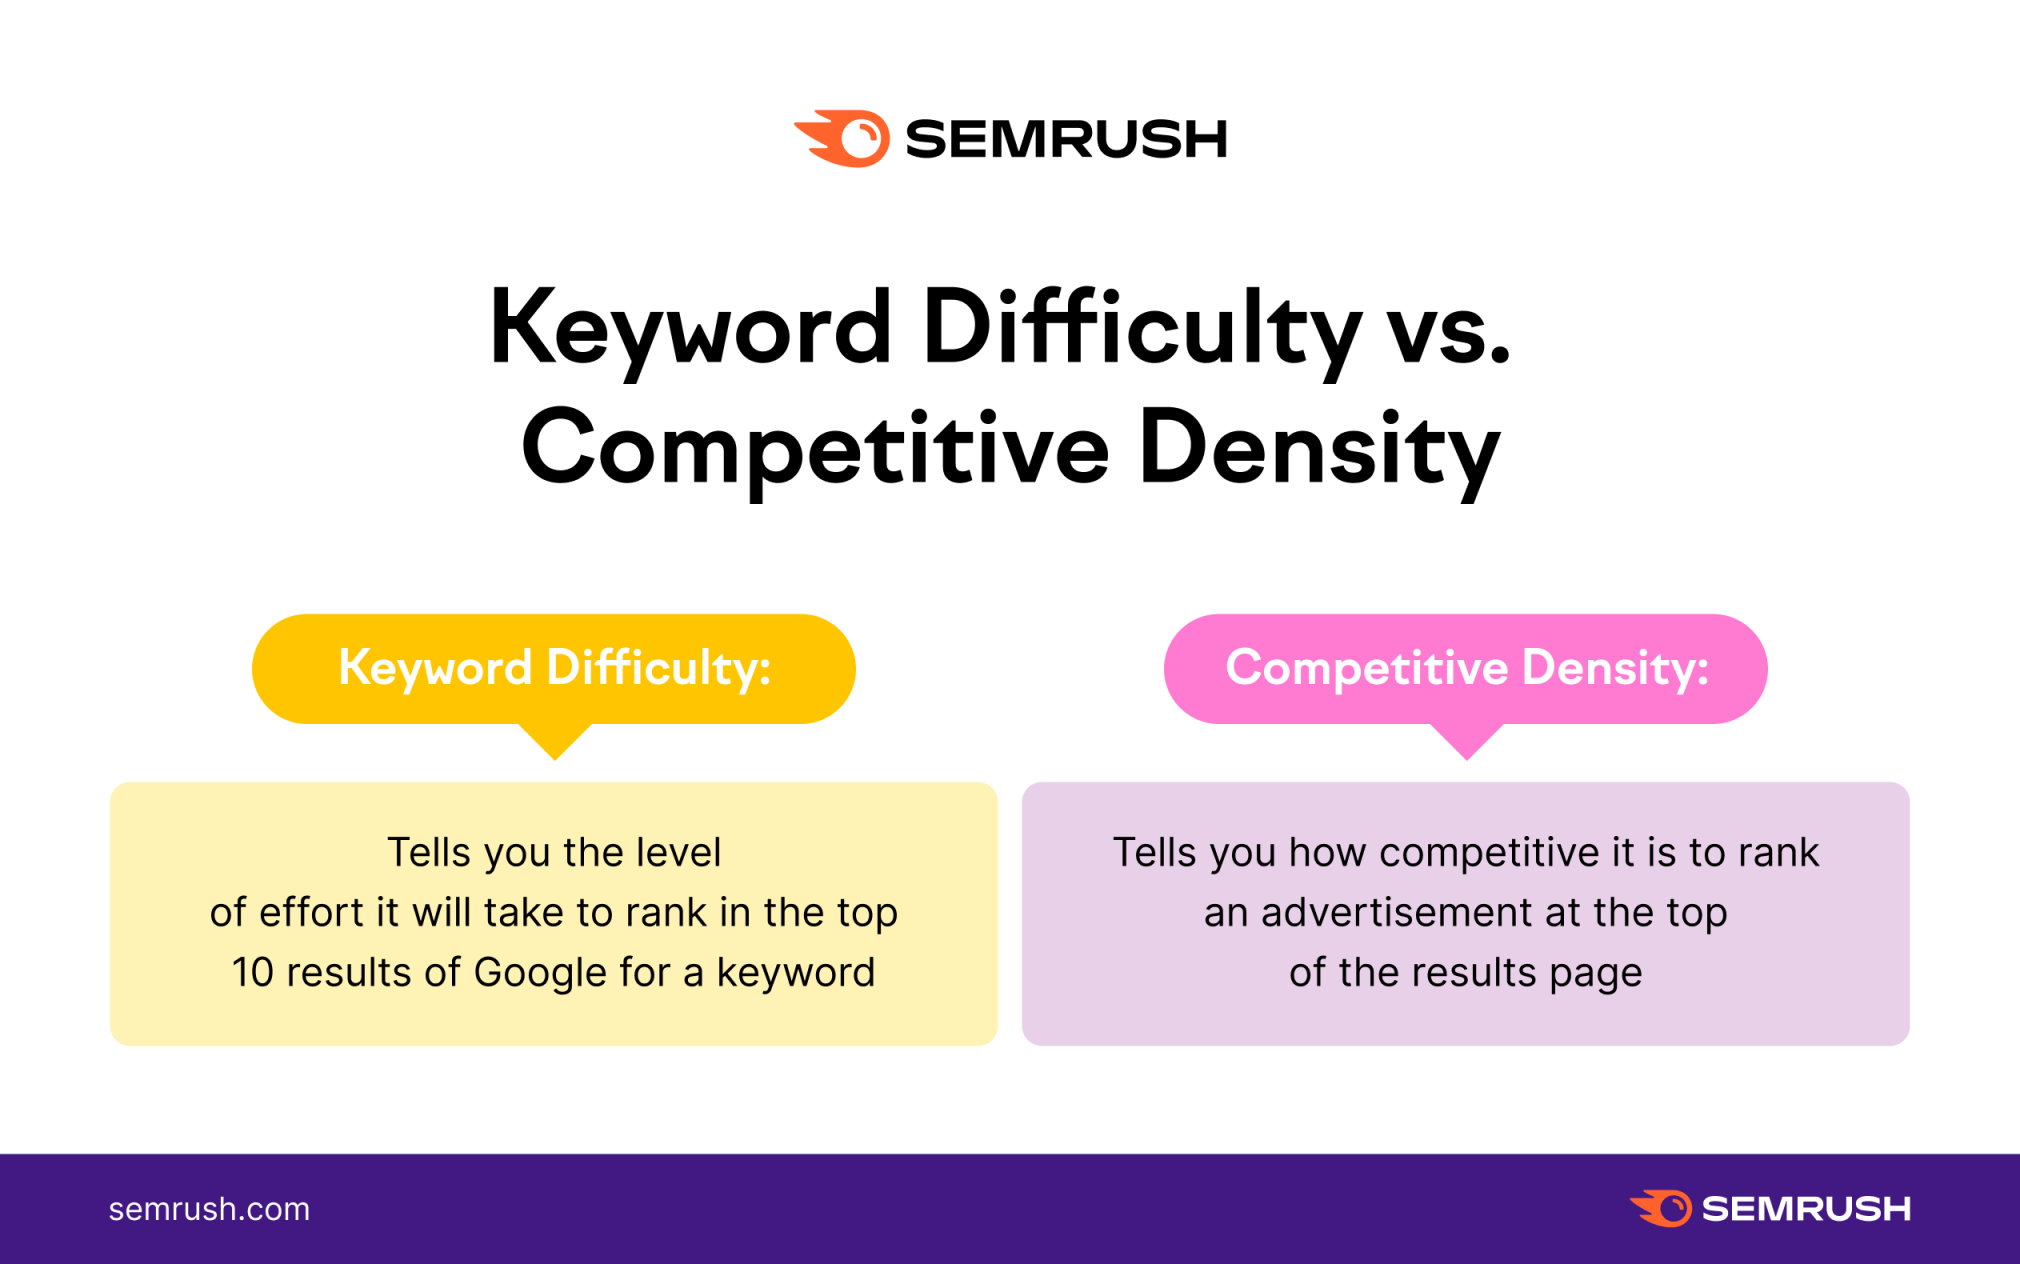 Competitive Density vs. Keyword Difficulty